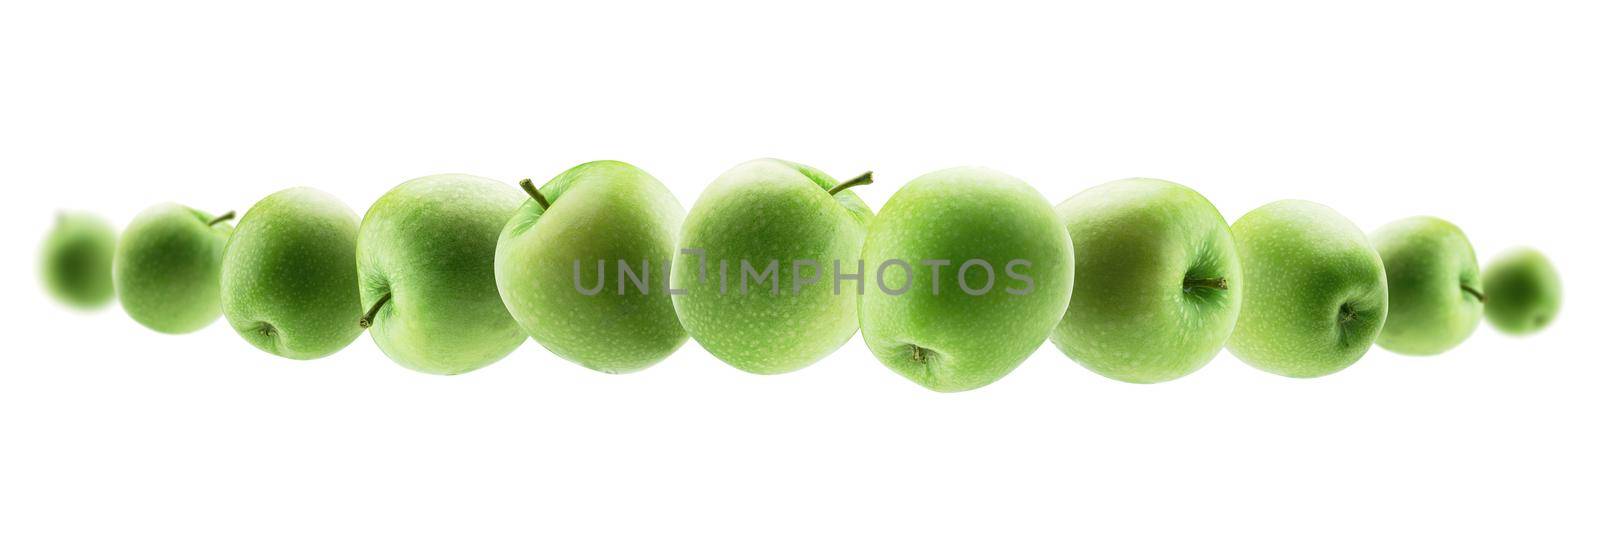 Green apples levitate on a white background.